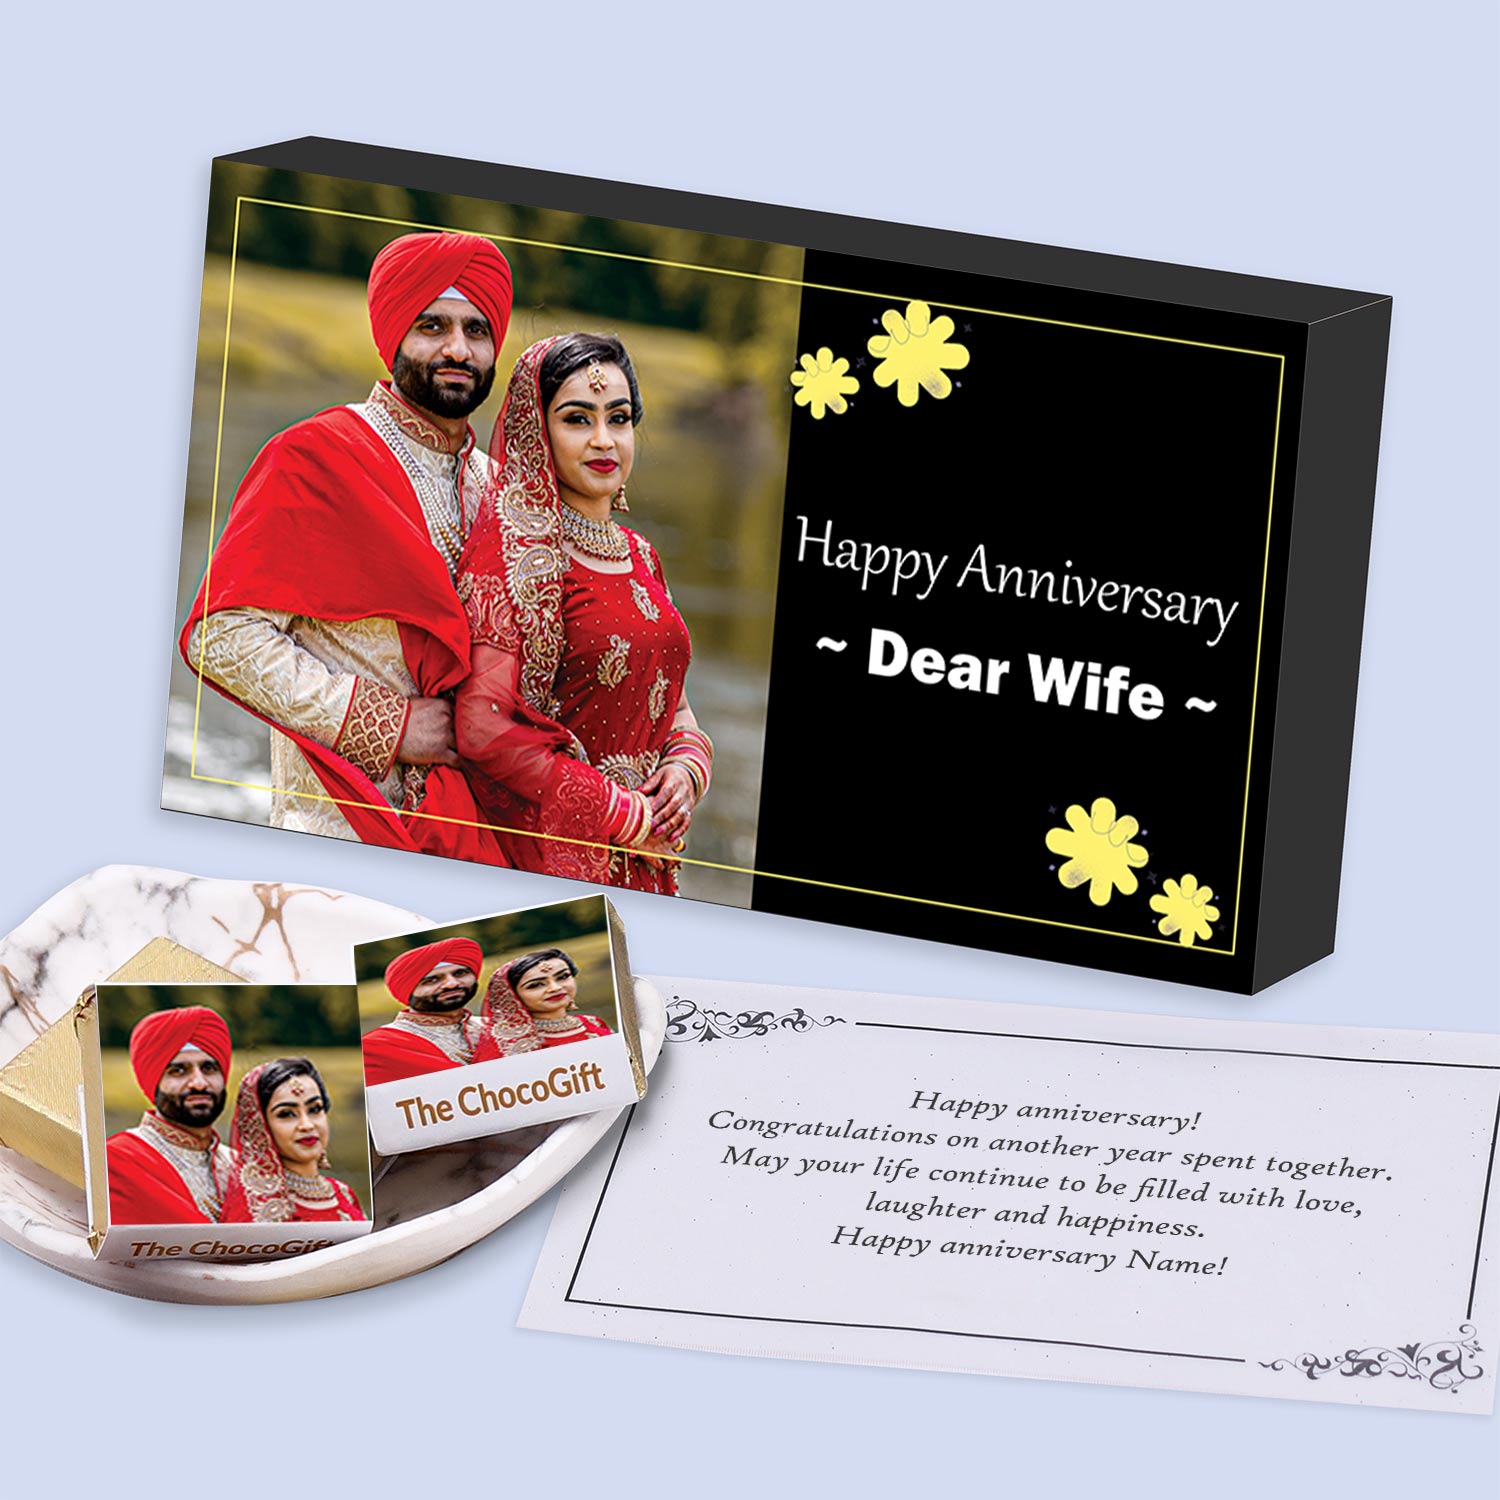 Buy Wedding Gift Personalised Wedding Day Gifts for Newlyweds Mr and Mrs Gift  Gifts for Bride and Groom, Couples Wedding Print Keepsake Online in India -  Etsy